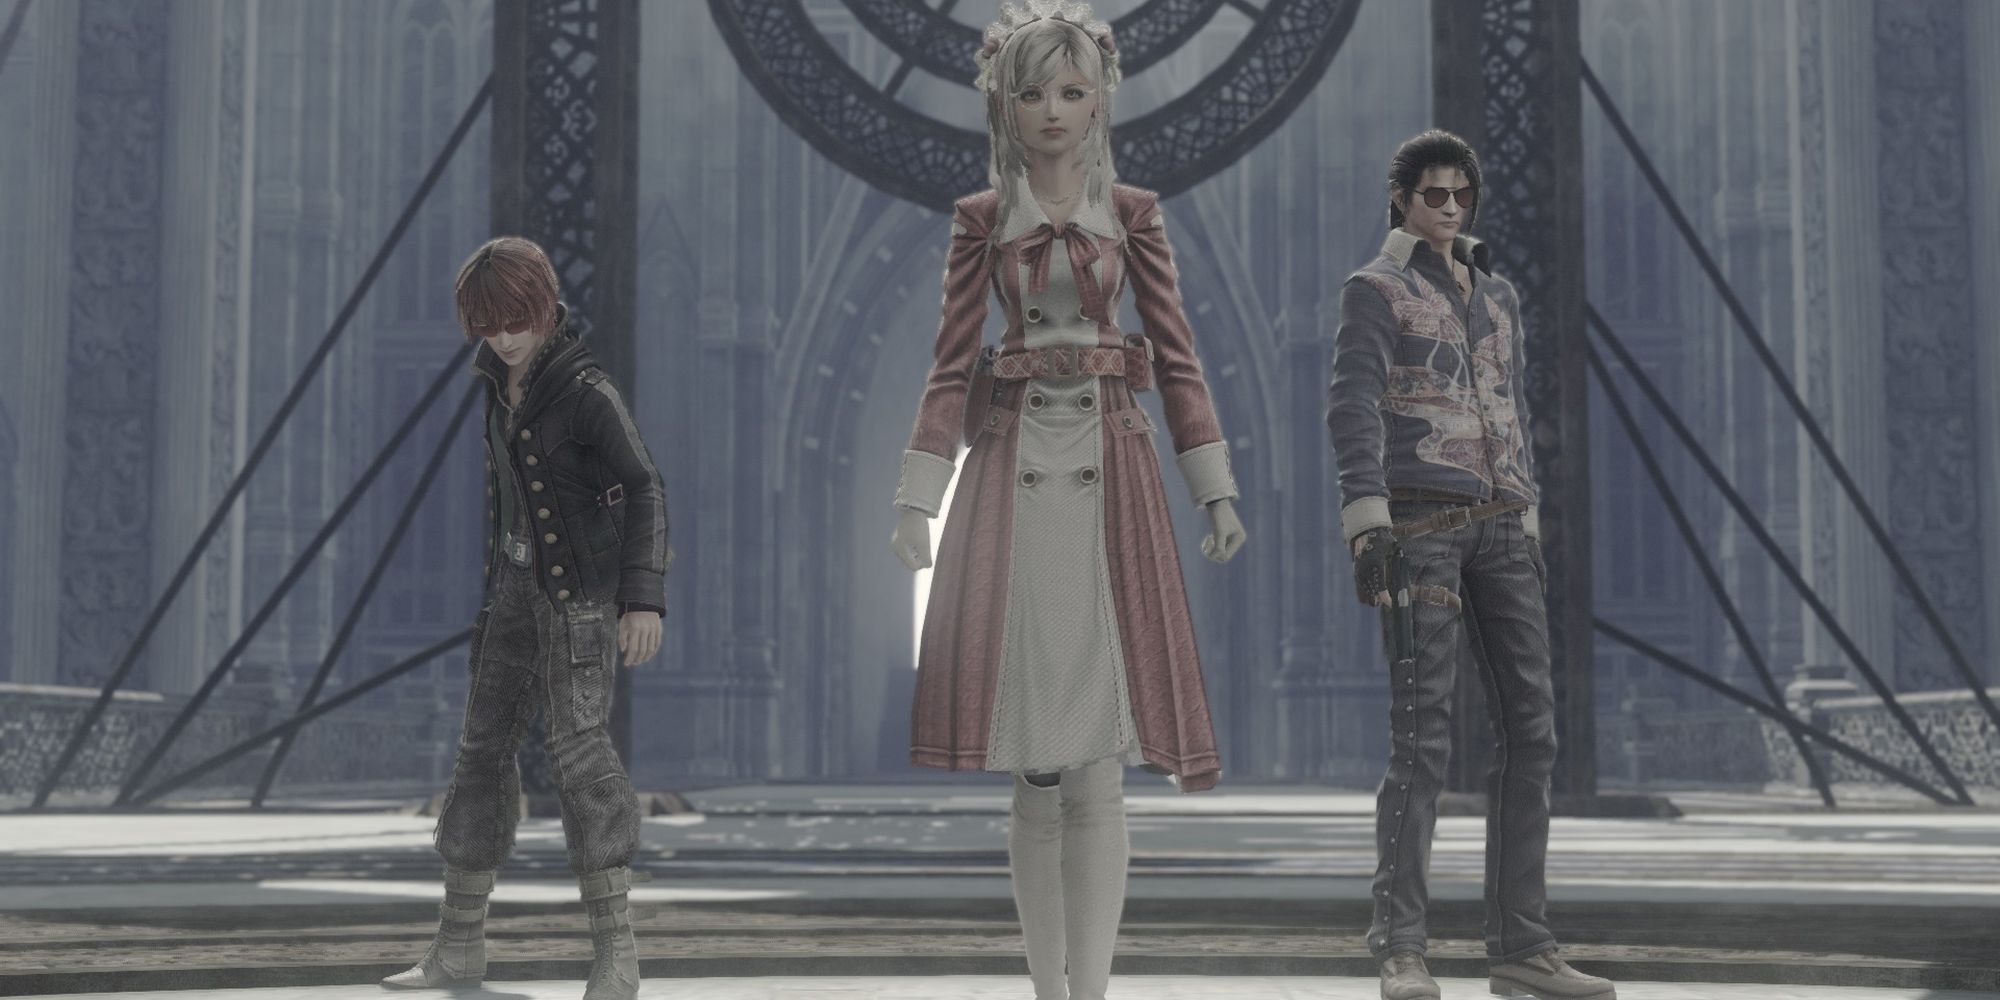 The three player characters in special costumes in Resonance of Fate